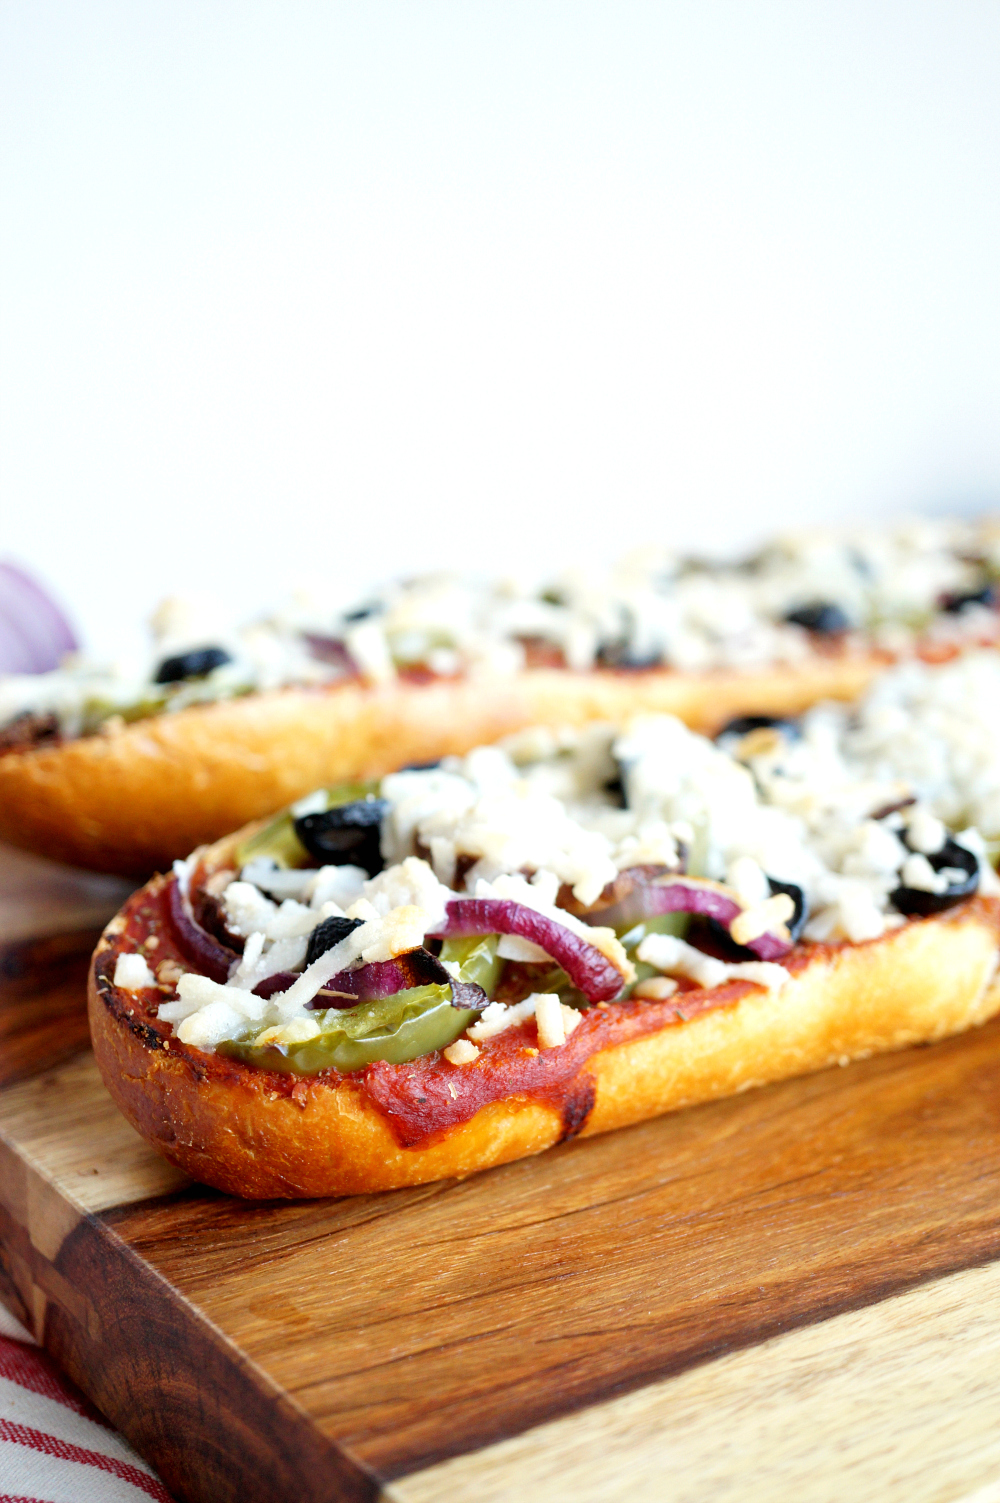 french bread pizza from the side